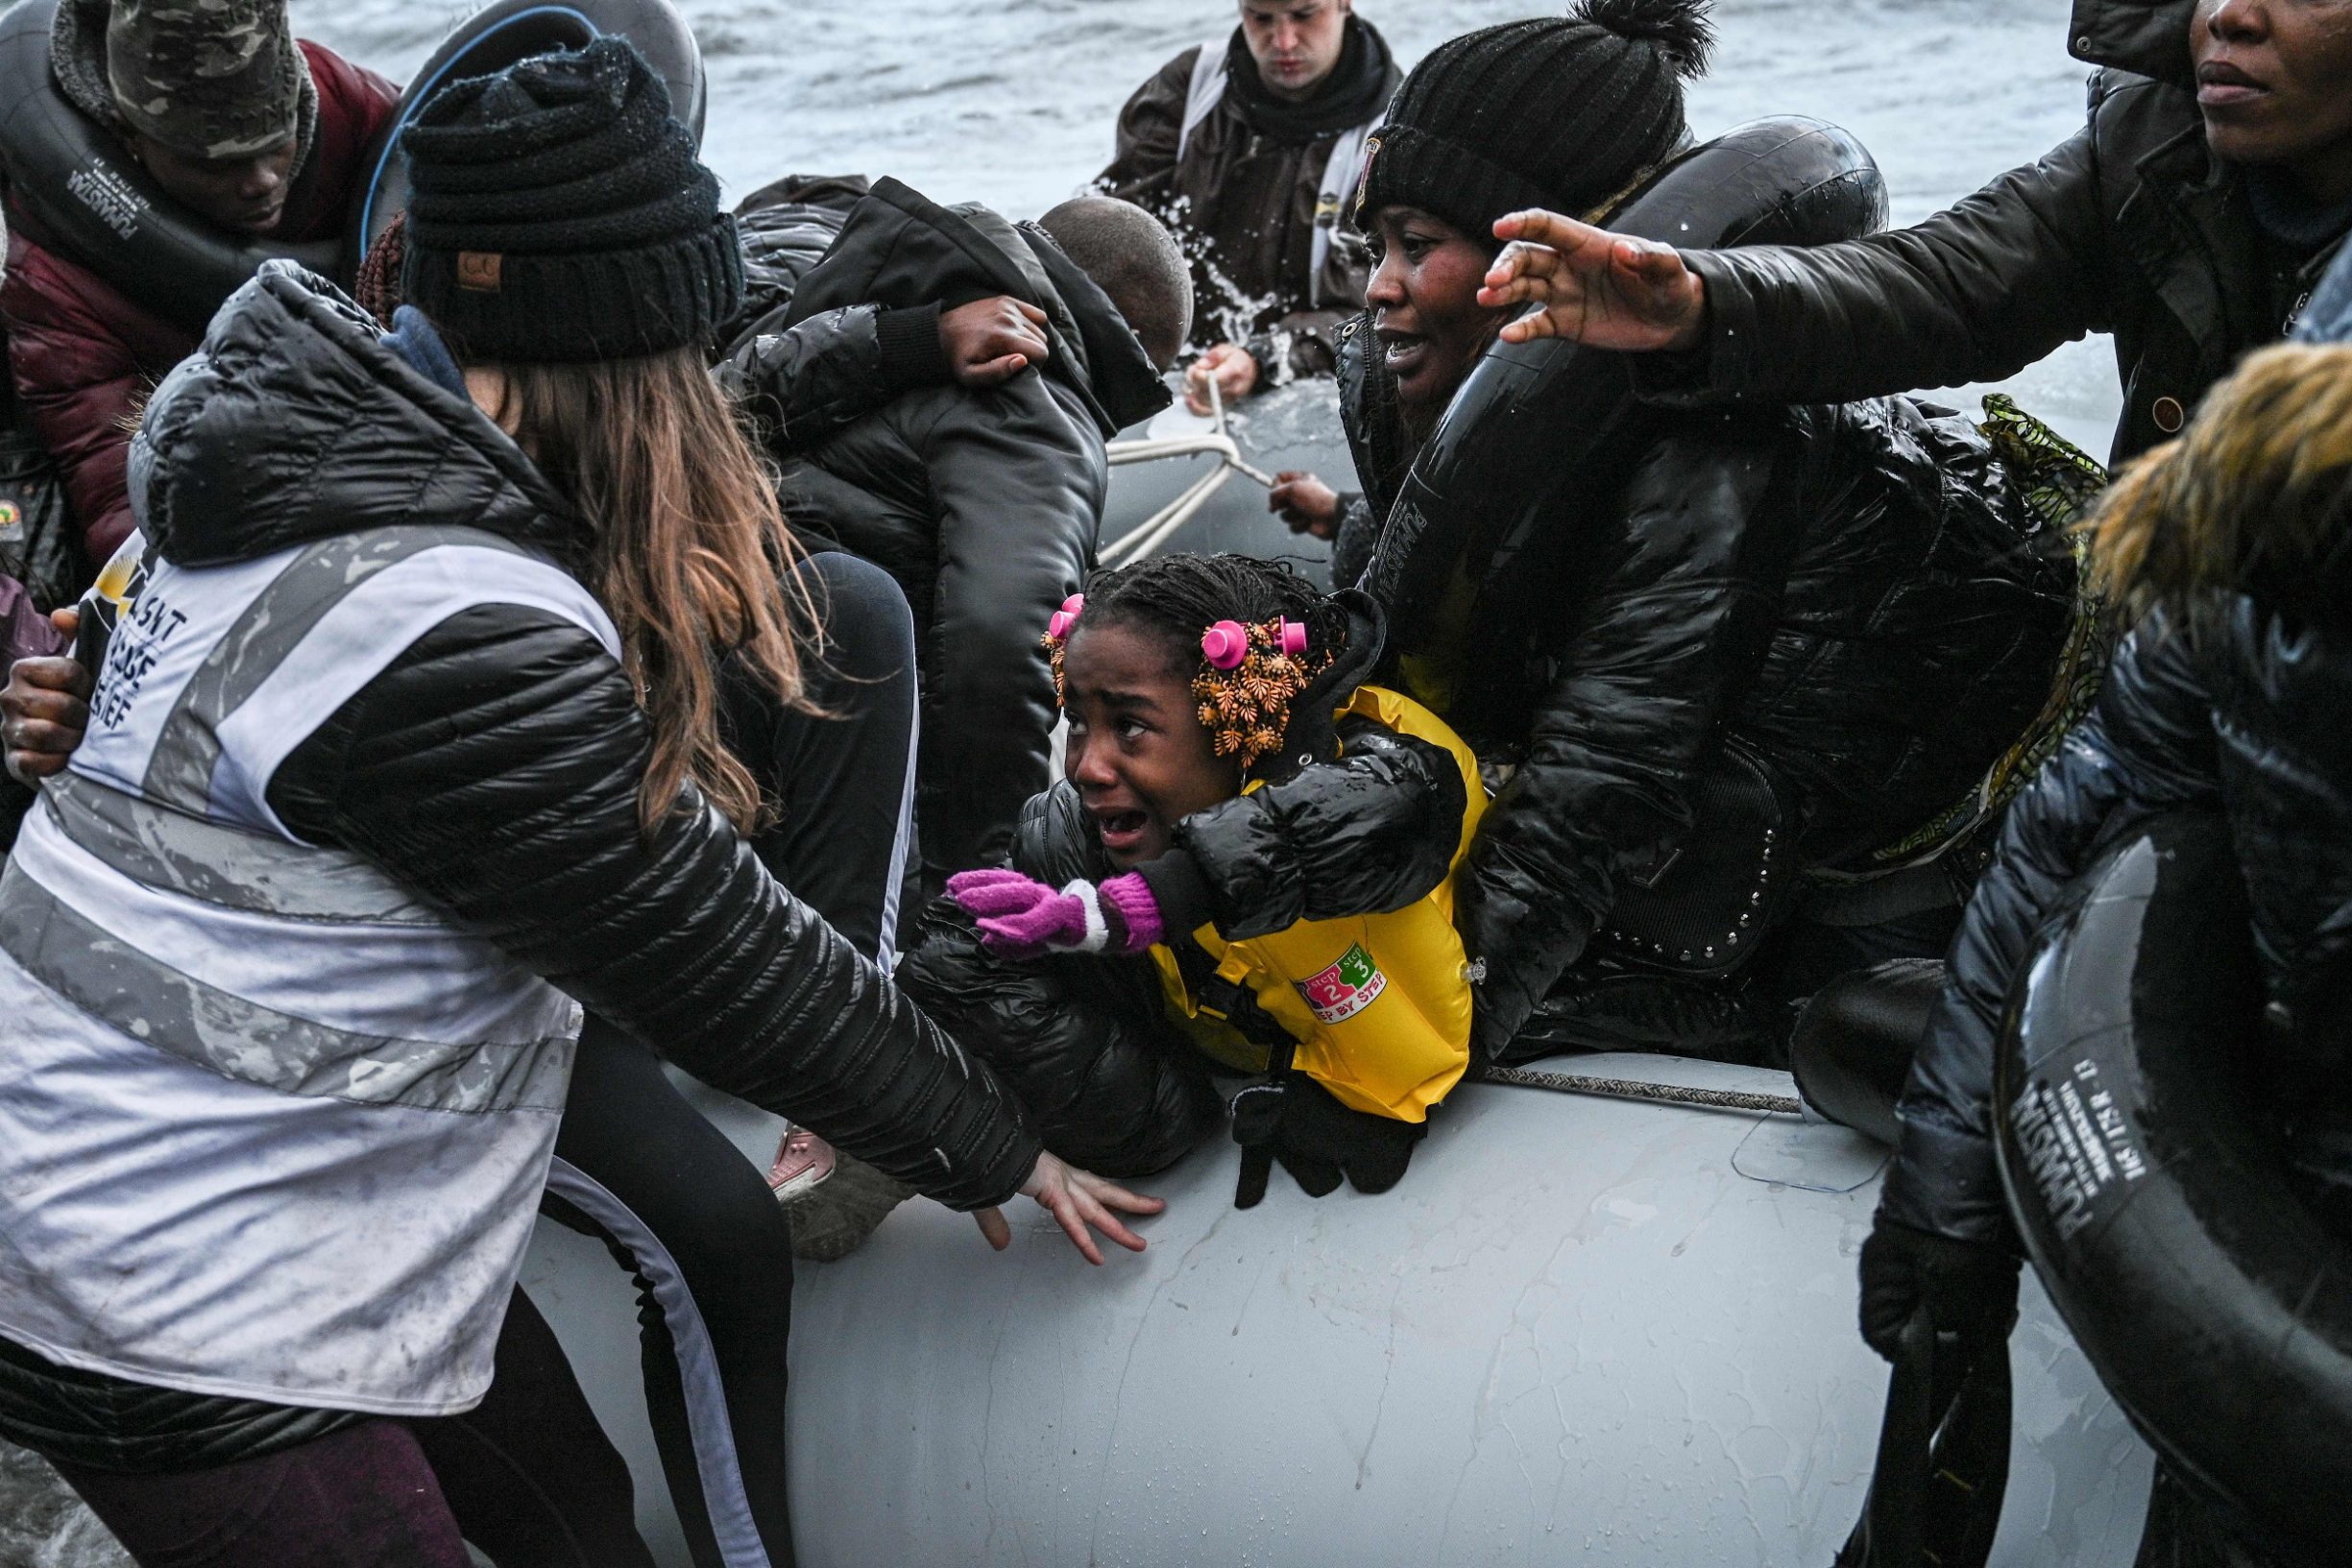 TOPSHOT - An NGO member helps a girl as a dinghy transporting 27 refugees and migrants originating from Gambia and the Republic of Congo lands in Lesbos island after they were rescued by a war ship during their sea crossing between Turkey and Greece on February 29, 2020. - Greece blocked hundreds of migrants trying to enter the country on Friday after Turkey said it would open the gates for refugees from Syria to enter the European Union. Turkey's threat came hours after a Syrian strike on Thursday killed 33 of its soldiers in Idlib and was aimed at forcing European governments to do more to support it in its fight against the regime. (Photo by ARIS MESSINIS / AFP)